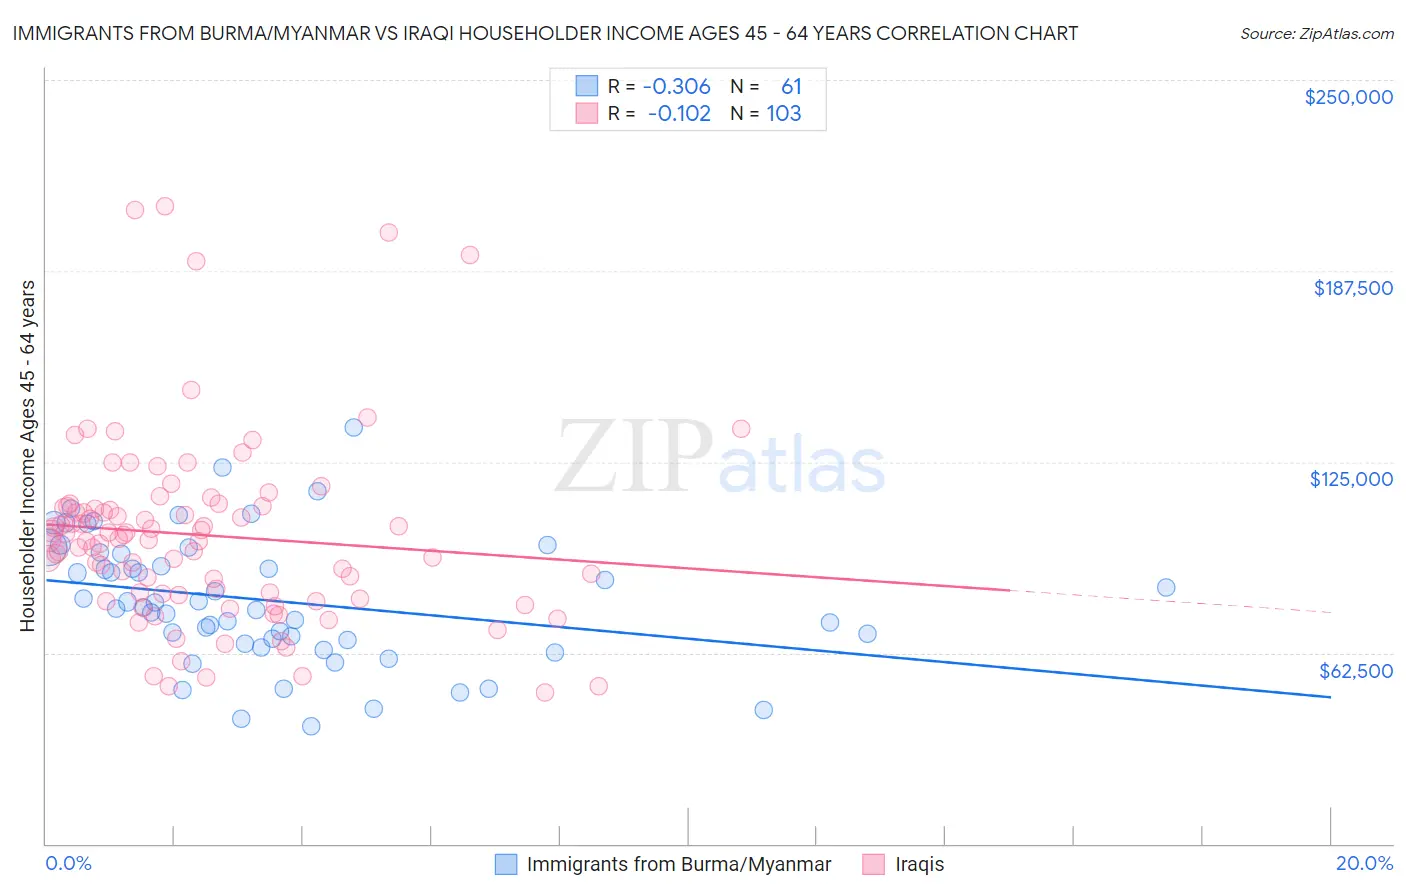 Immigrants from Burma/Myanmar vs Iraqi Householder Income Ages 45 - 64 years